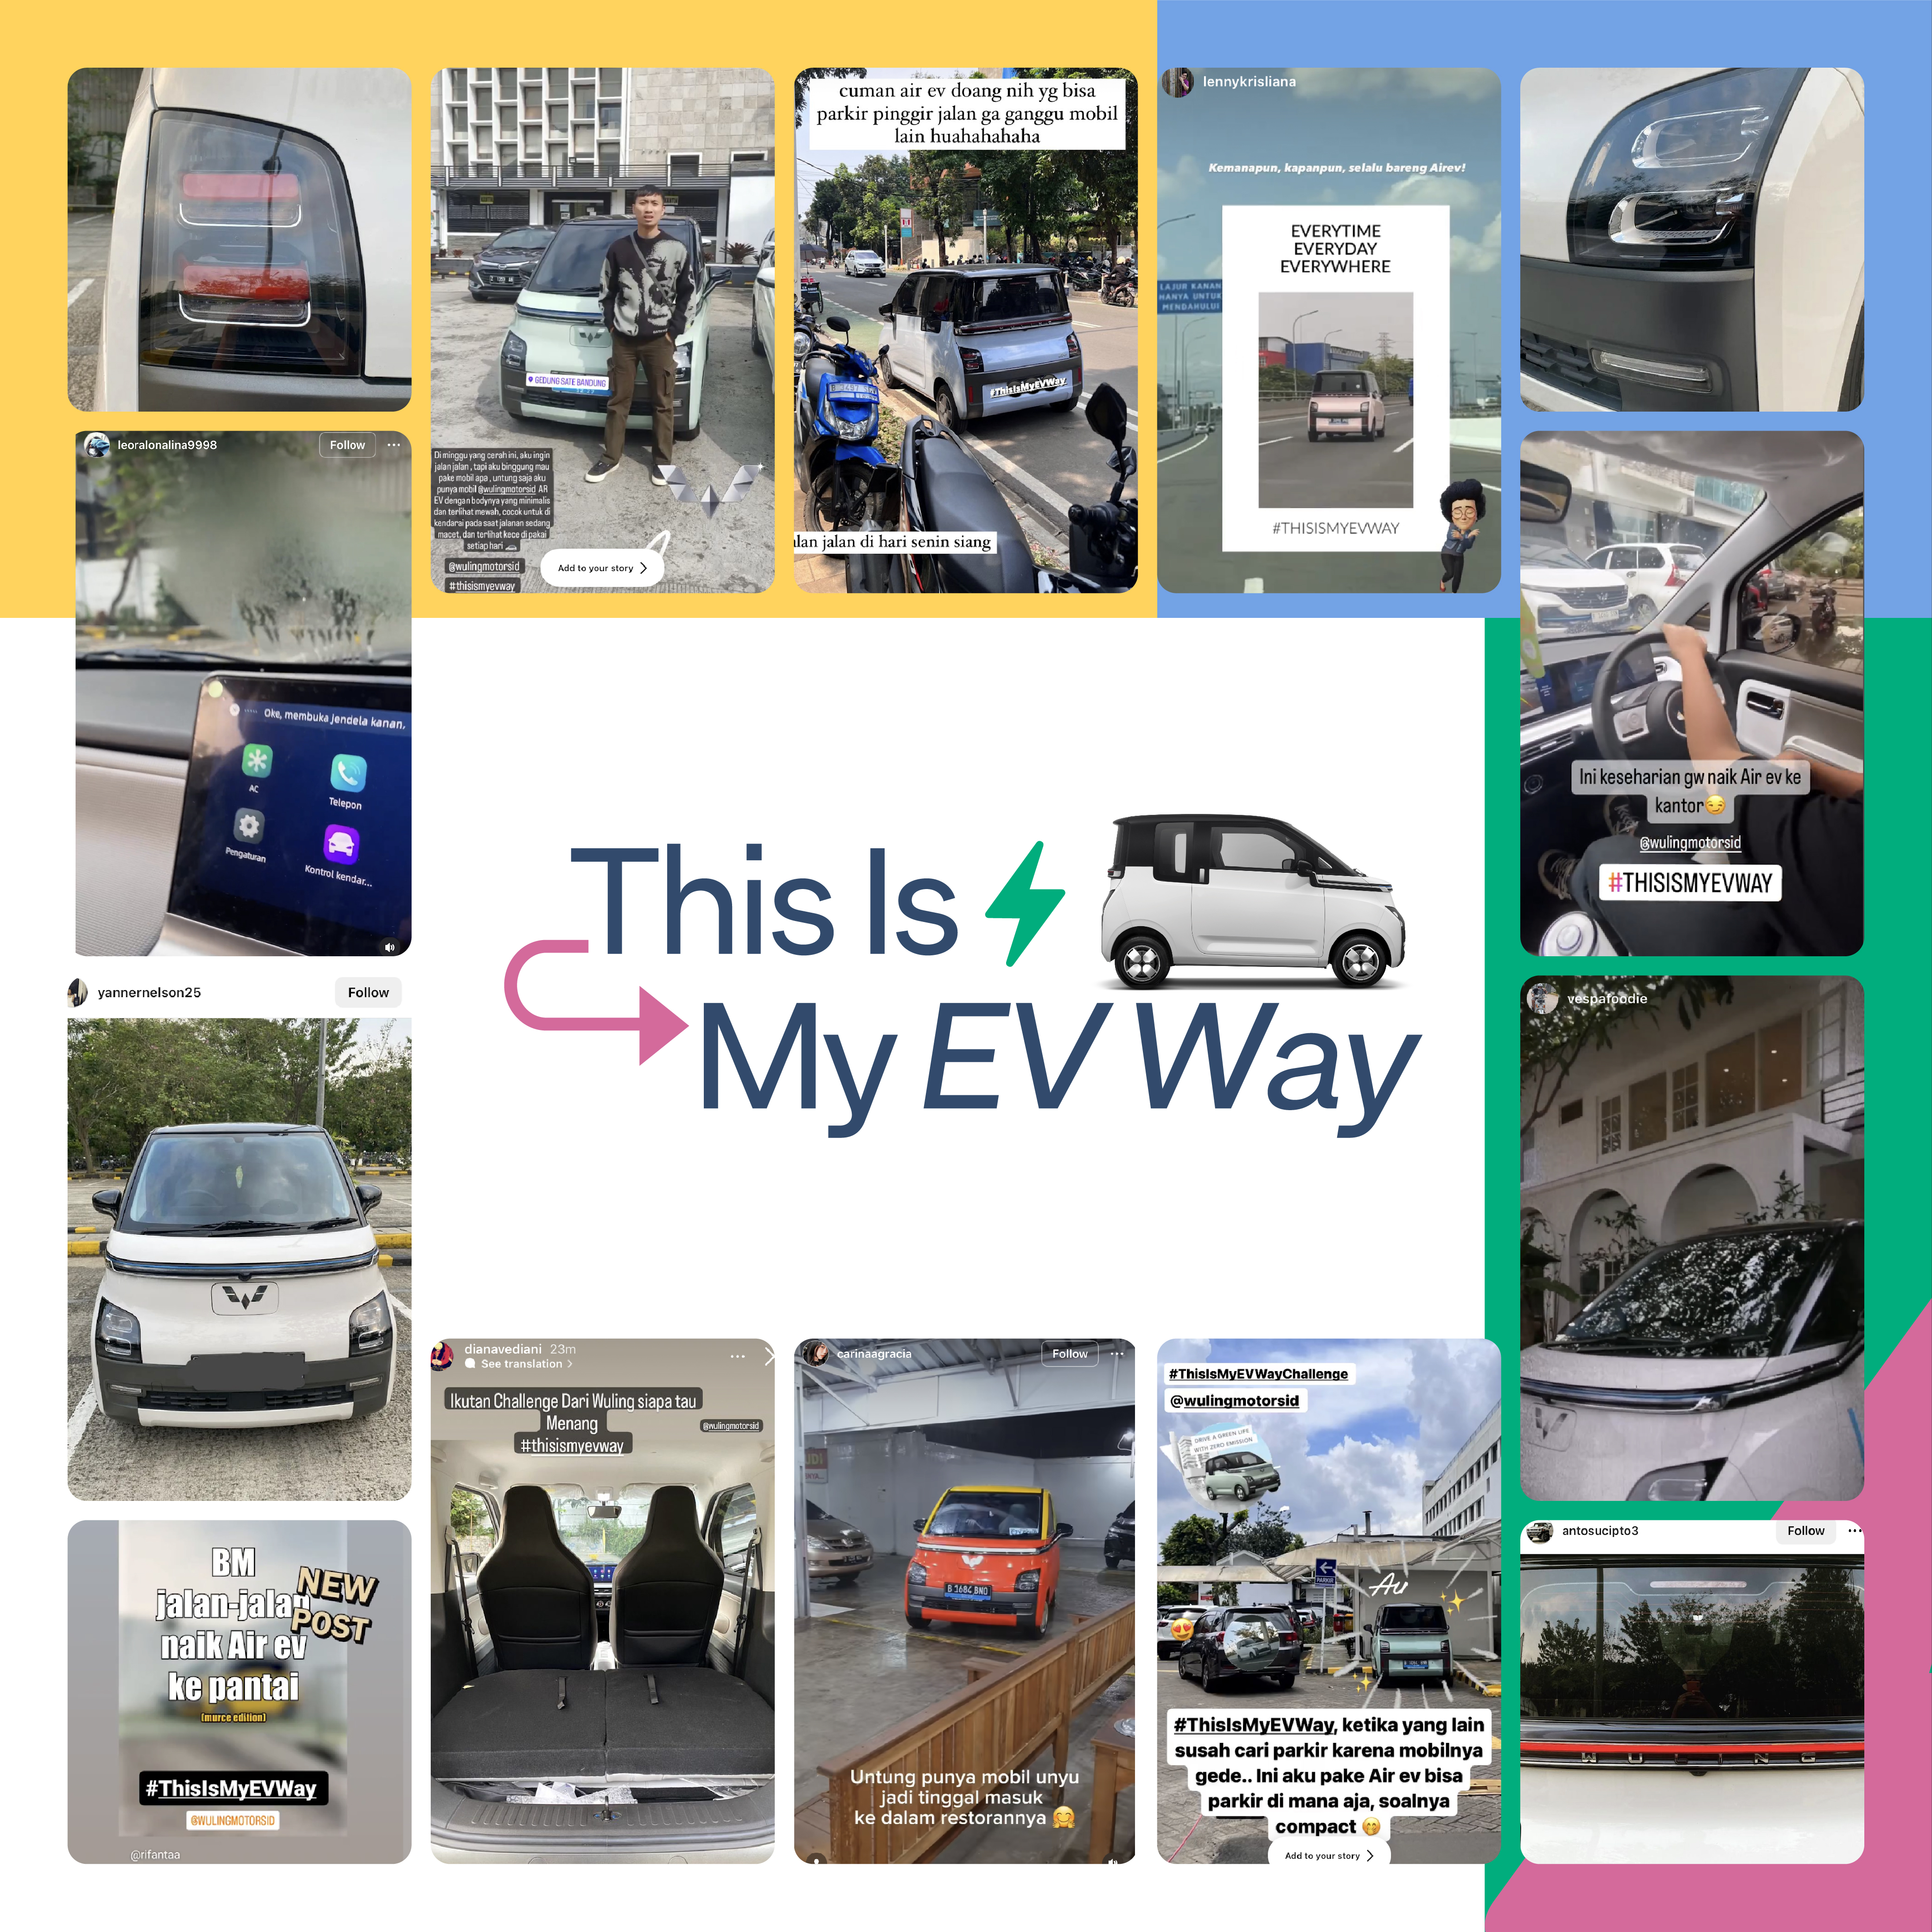 Image #ThisIsMyEVWay Becomes a Way for Consumers to Share the Excitement with Wuling Air ev